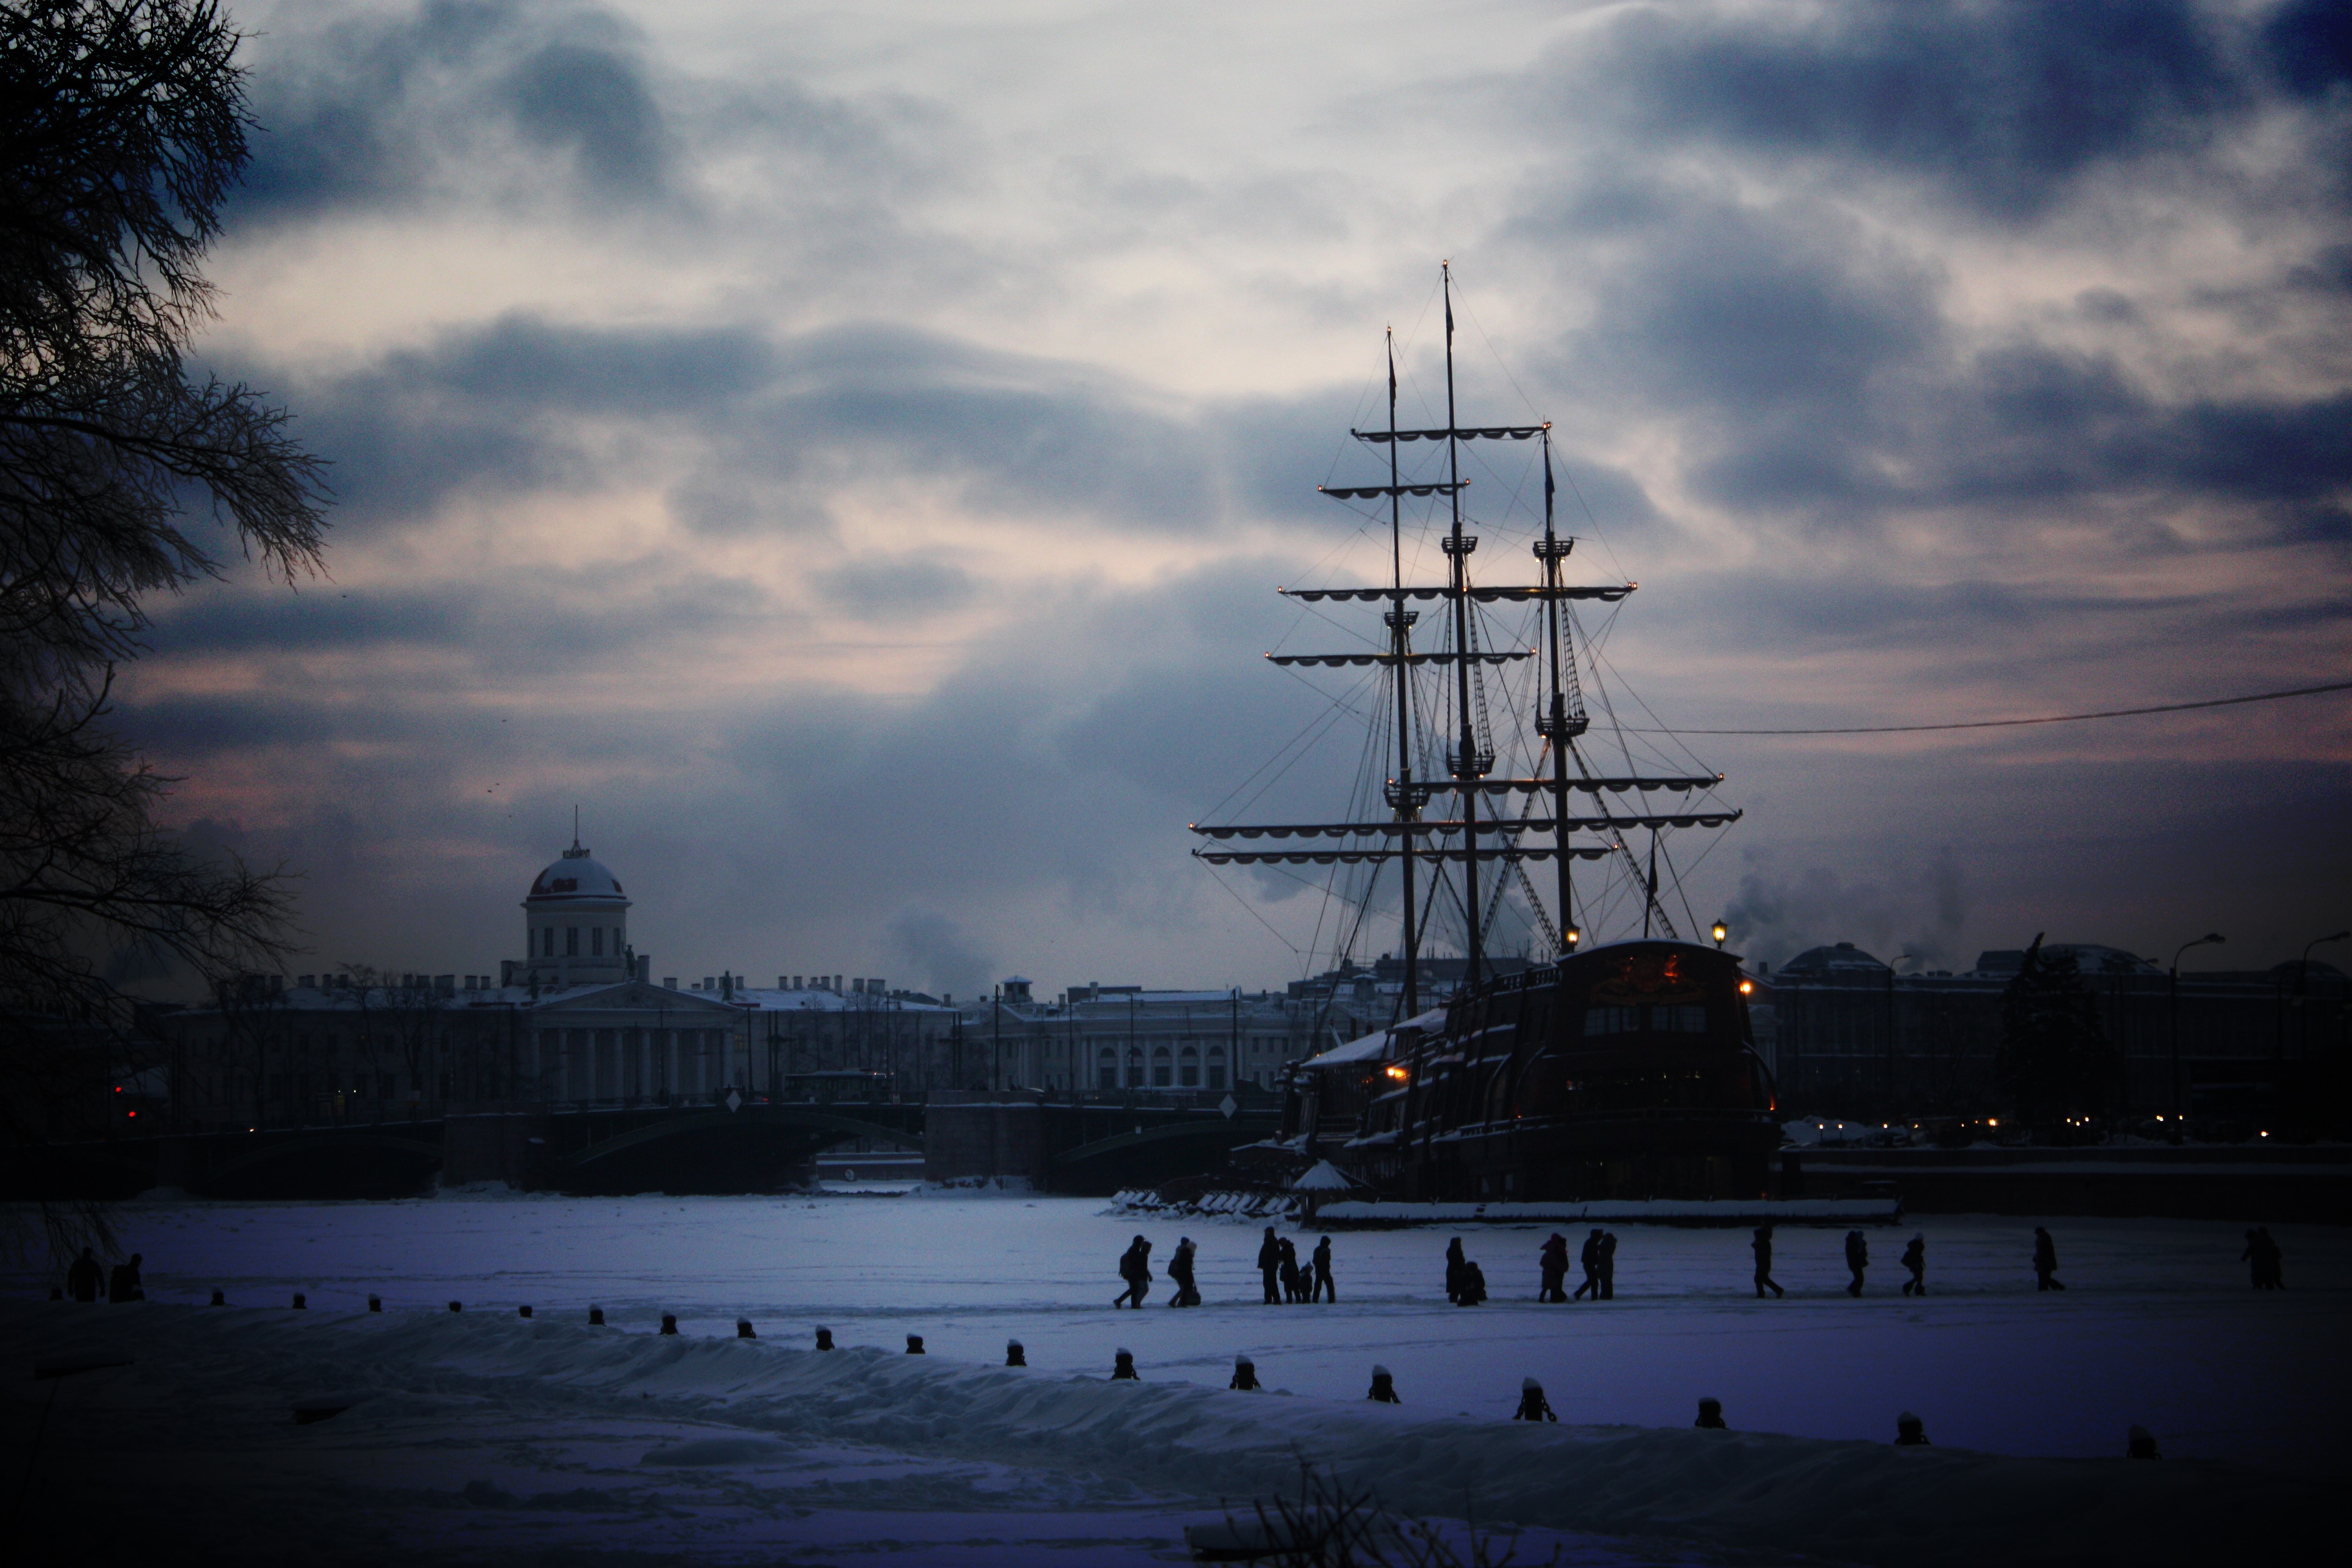 Sailing Ship Water Sea St Petersburg Russia River Winter Snow Frozen River Clouds People City Lights 4272x2848